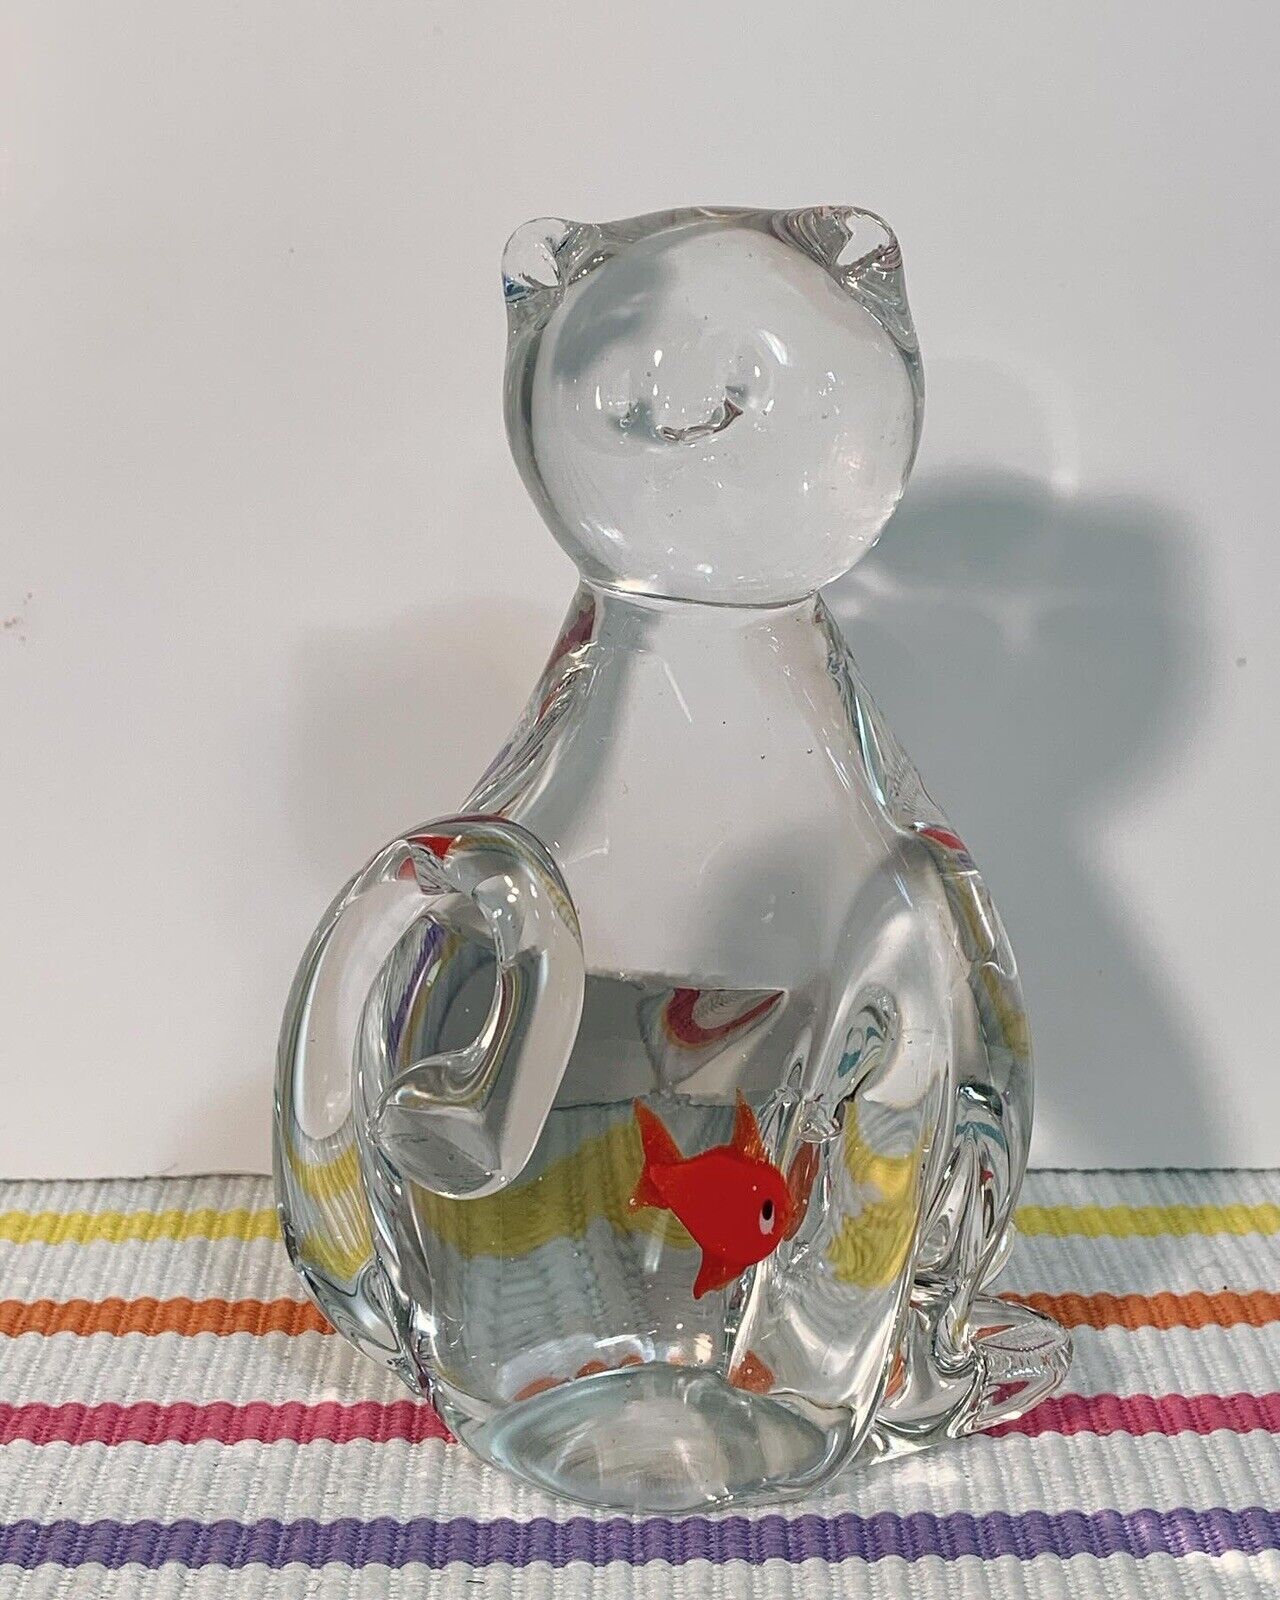 Vintage Art Glass Cat Figurine Paperweight with Red Fish in Belly 5.5” Tall